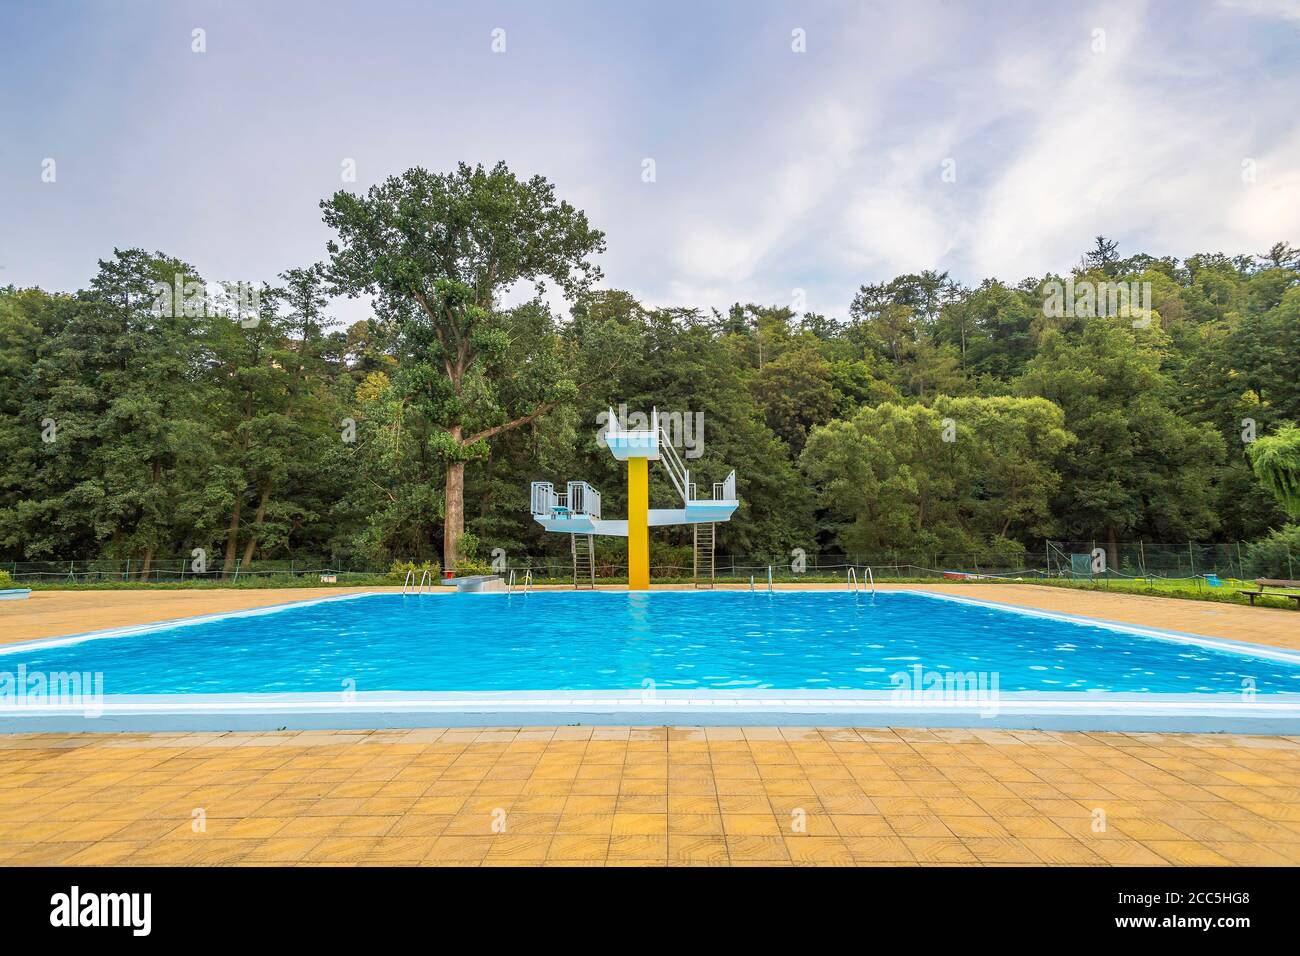 vacant outdoor swimming pool with diving tower Stock Photo